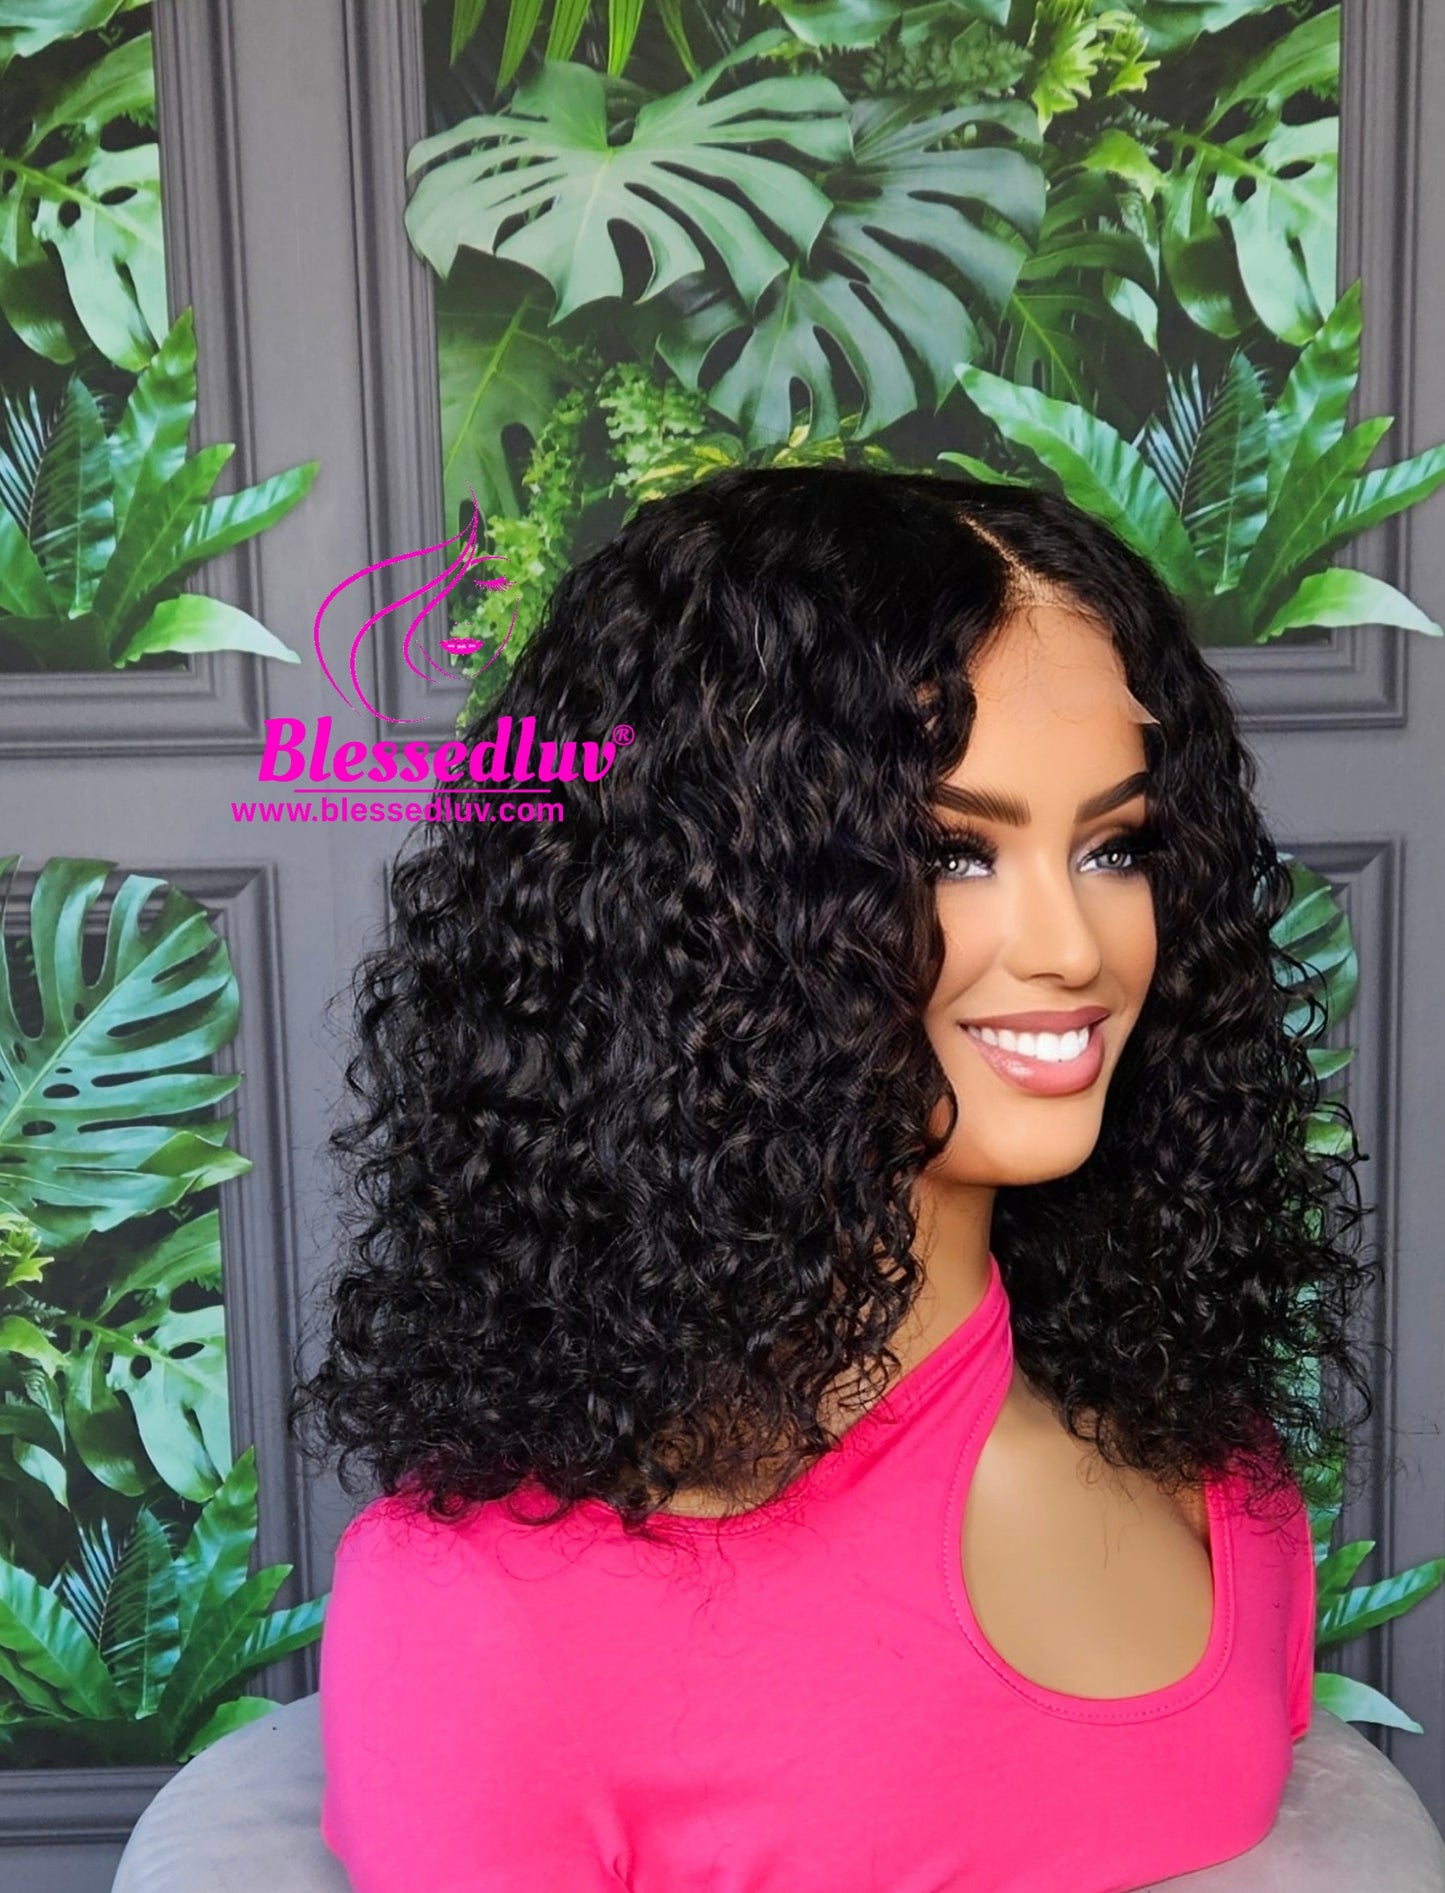 Beth - Luxury Natural Curls Lace Closure Wig-WIG-www.blessedluv.com-Brazilianweave.com